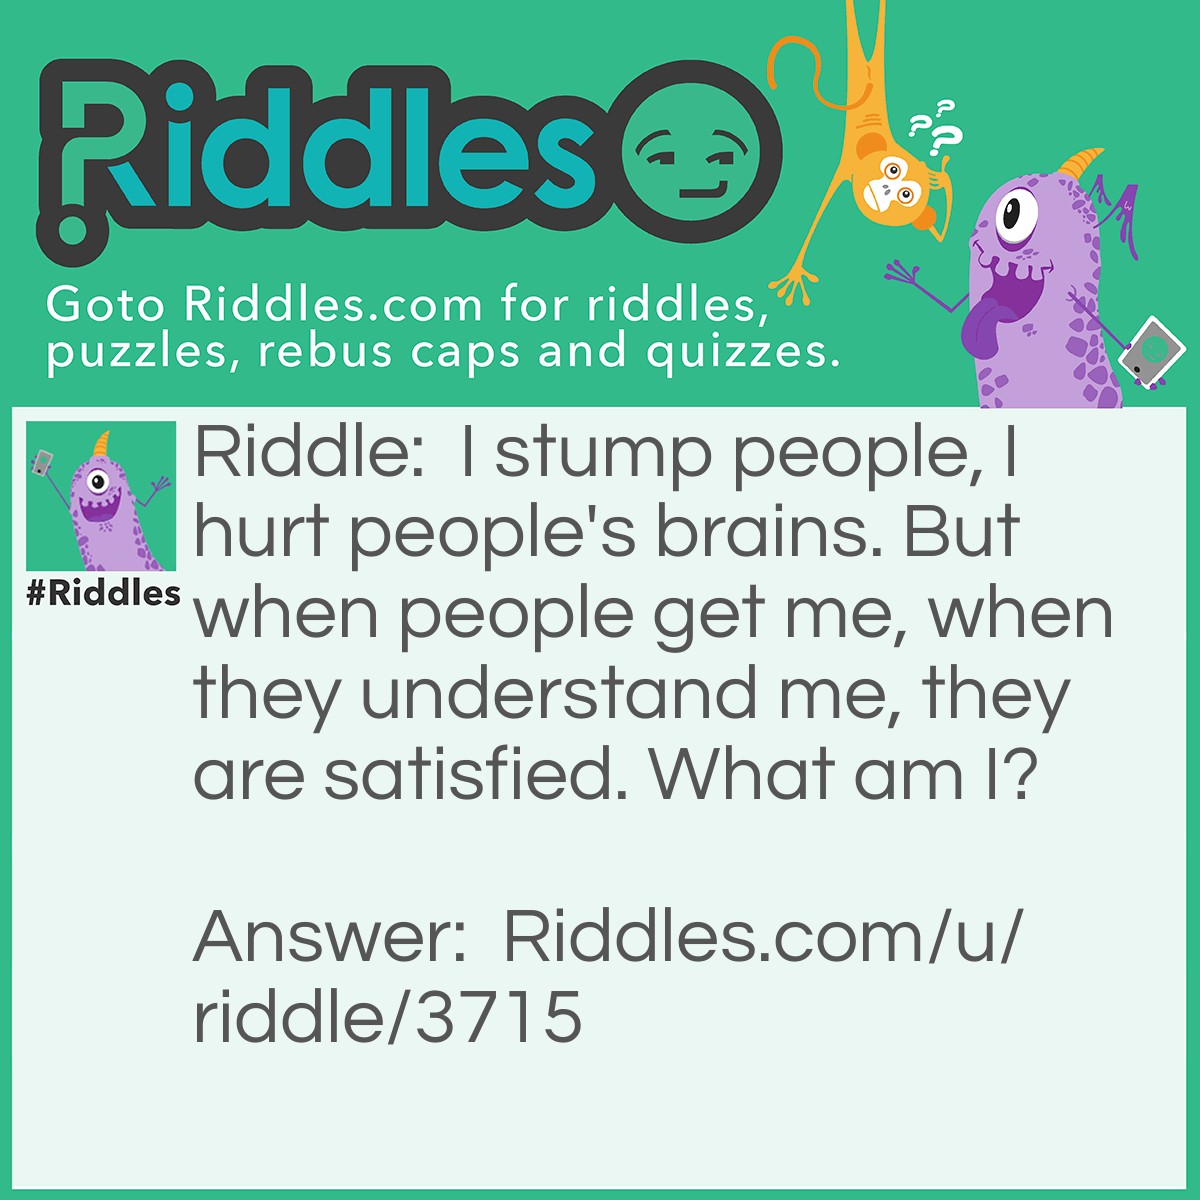 Riddle: I stump people, I hurt people's brains. But when people get me, when they understand me, they are satisfied. What am I? Answer: A riddle.